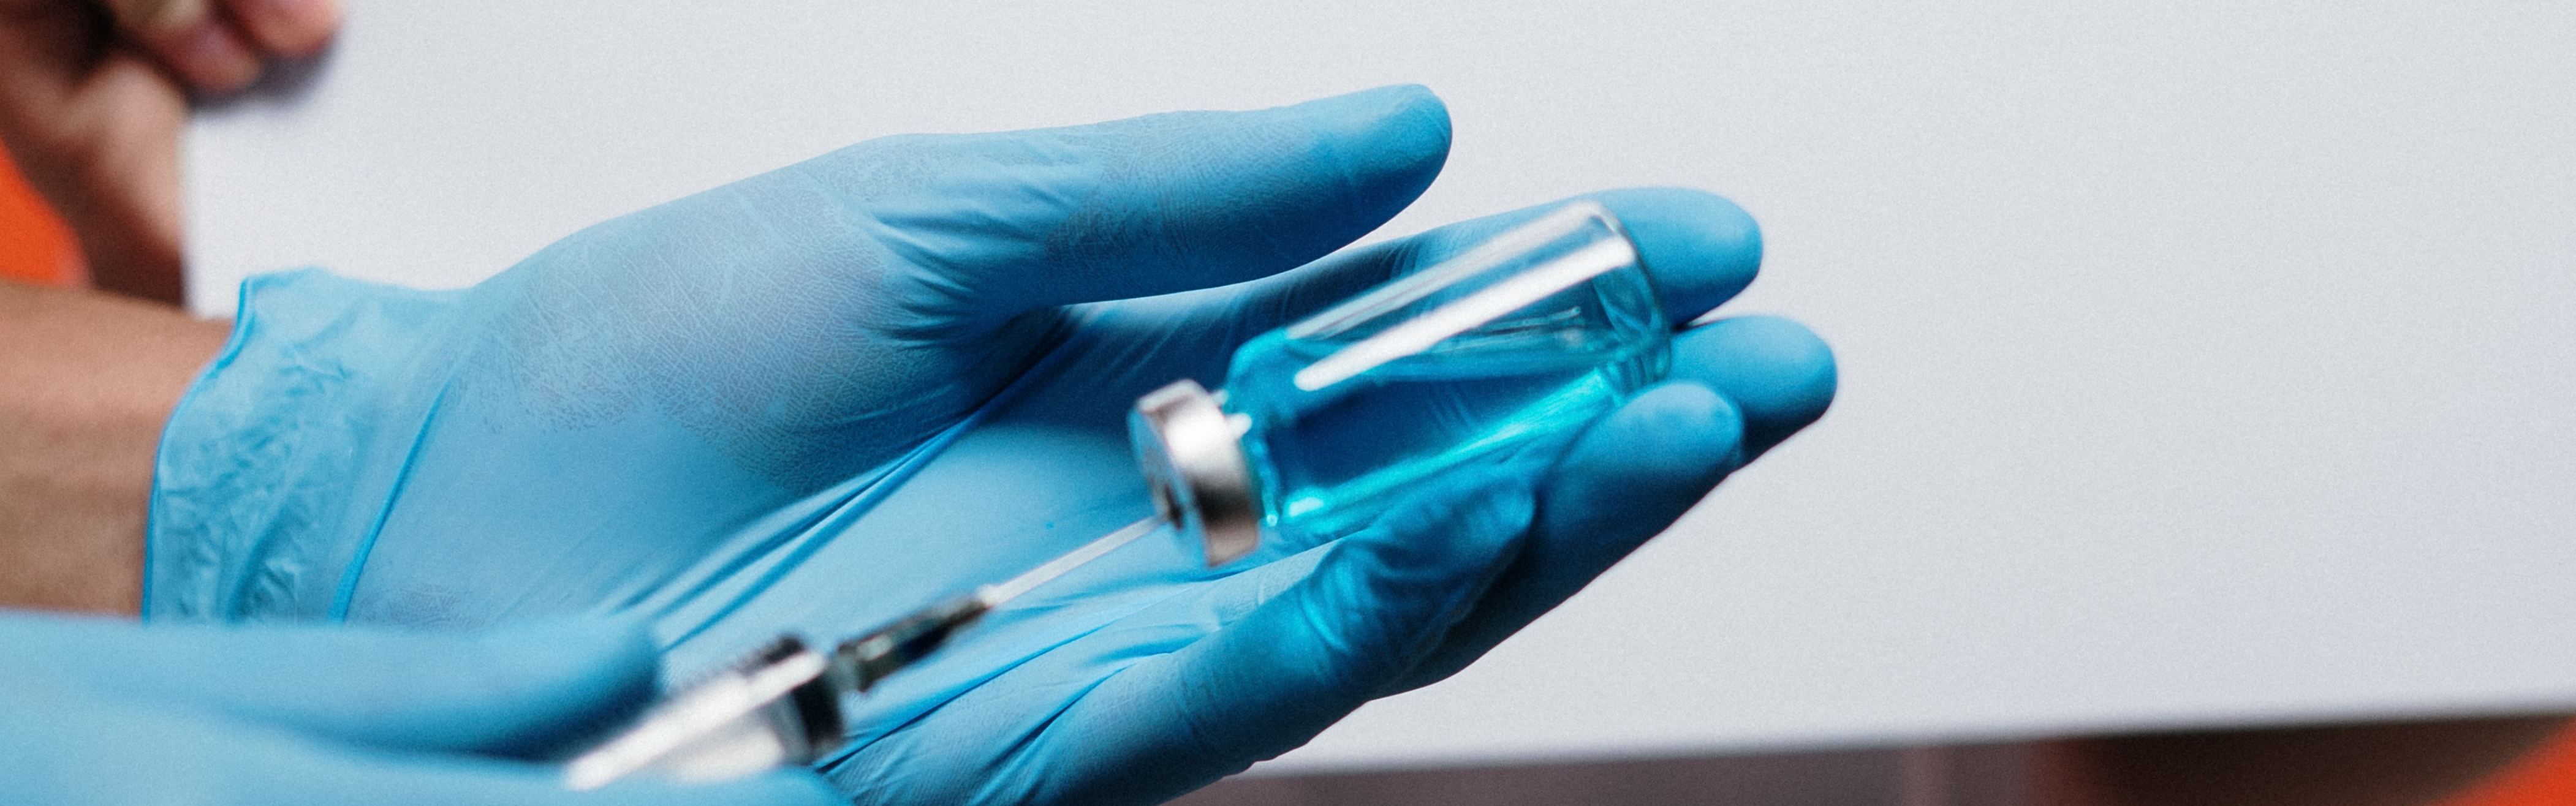 Person’s hands with blue gloves prepare vaccination with a syringe and small bottle.